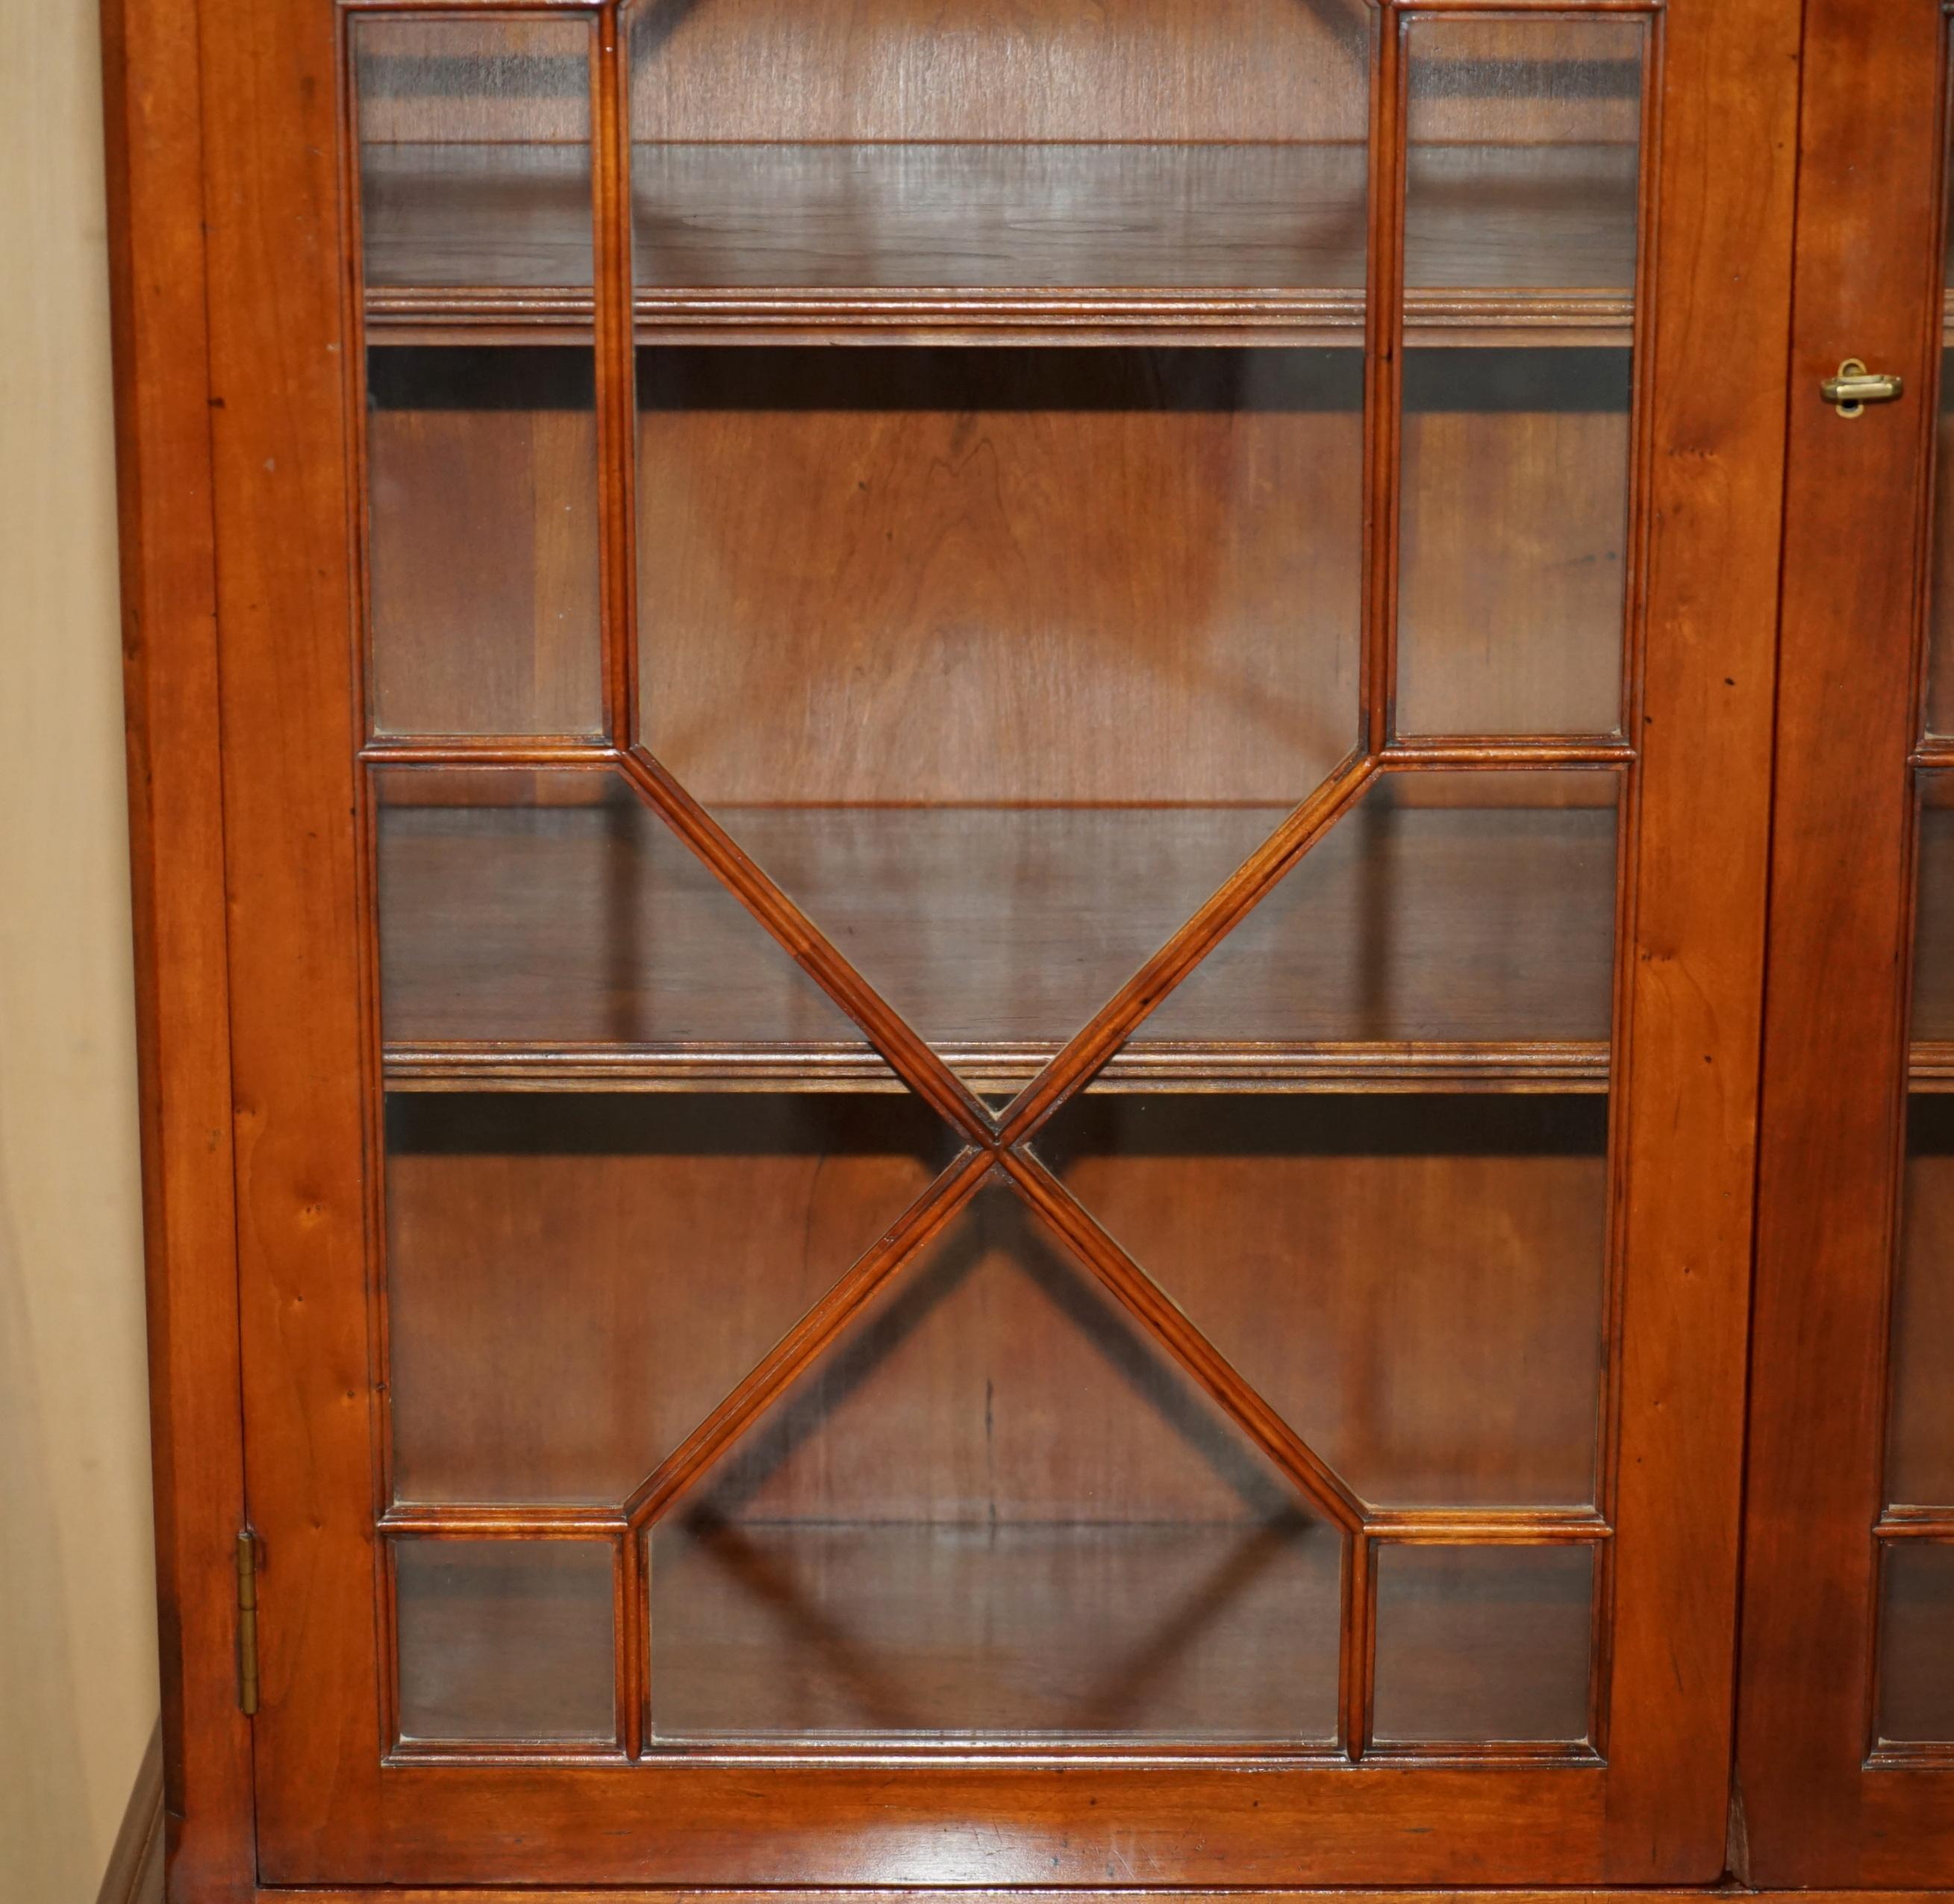 Hardwood HARRODS LONDON REH KENNEDY ASTRAL GLAZED LiBRARY BOOKCASE CUPBOARD STORAGE UNIT For Sale